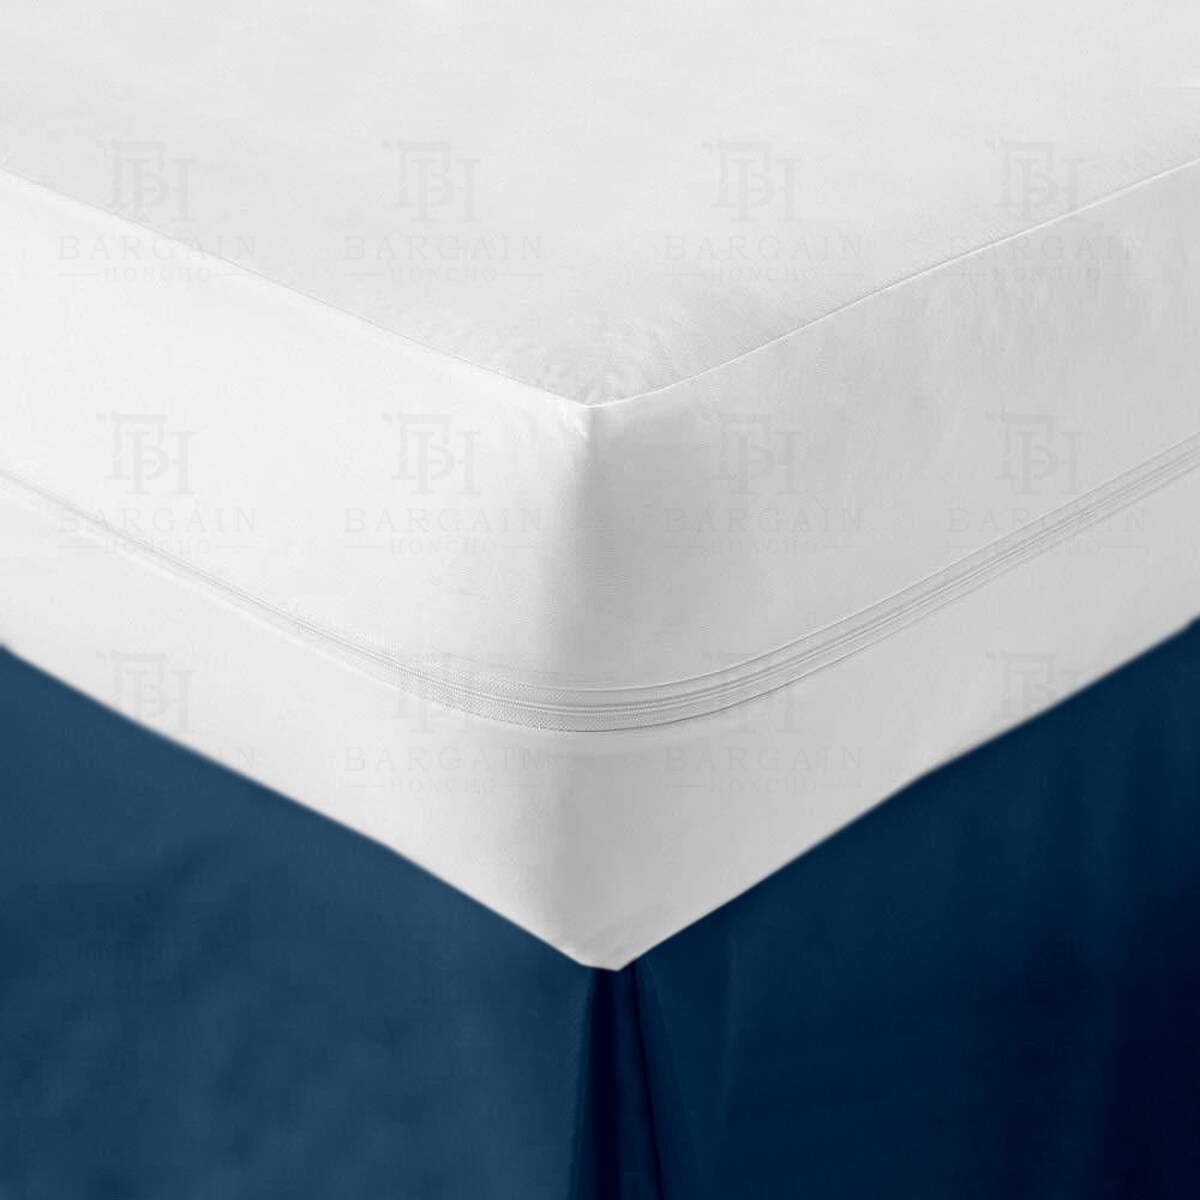 Bargain Hunters Heavyweight Zippered Waterproof and Bed-Bug Proof Vinyl Mattress Cover Protector